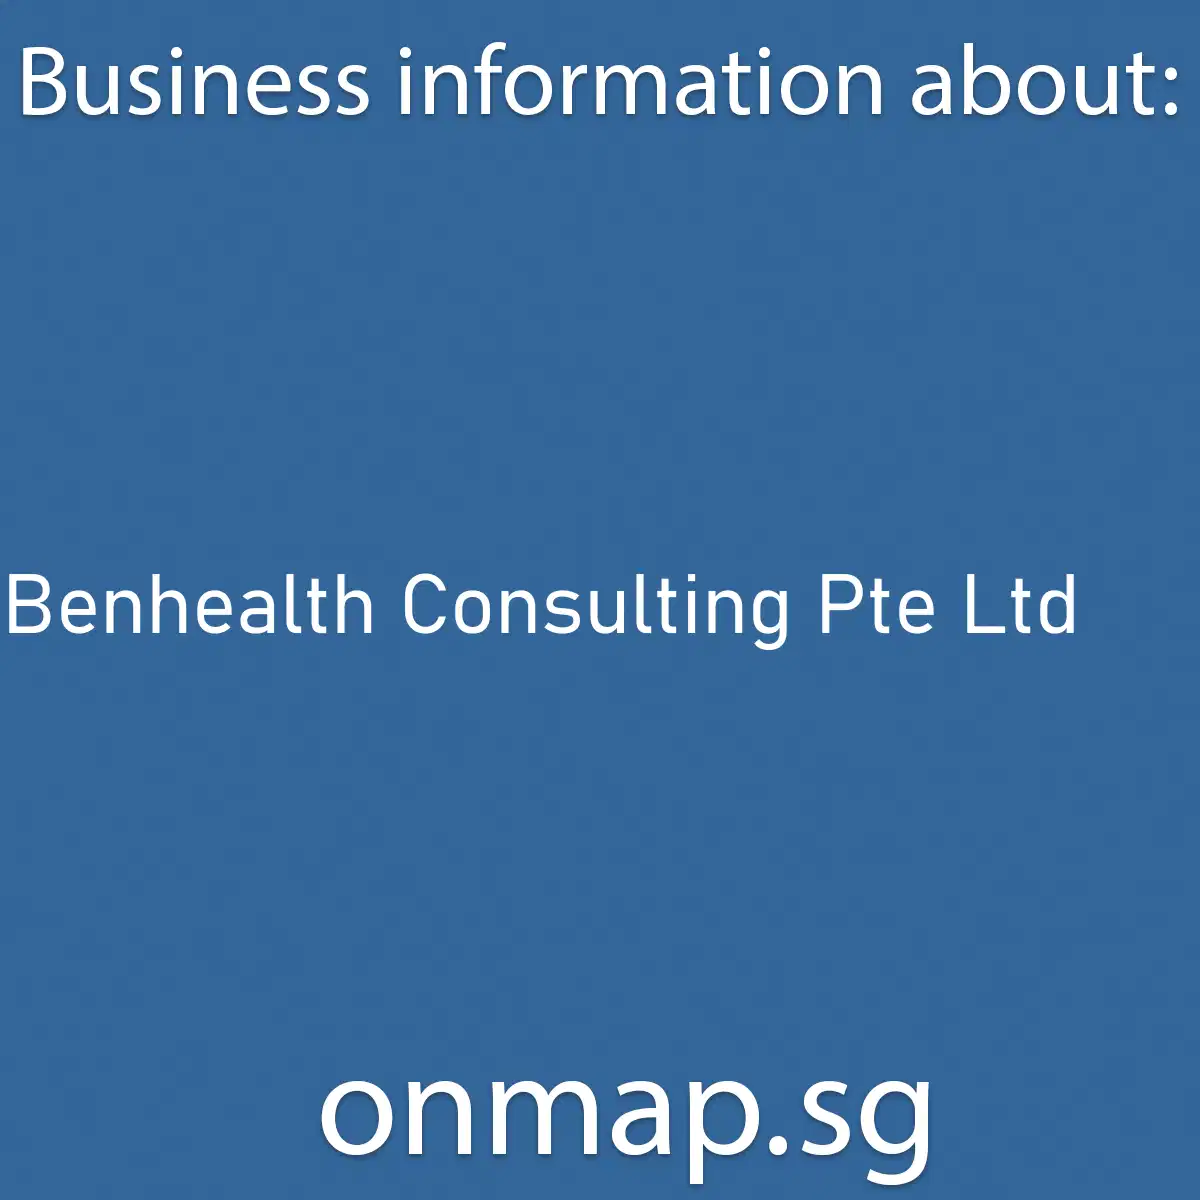 Benhealth Consulting Pte. Ltd. - Details, Locations, Reviews